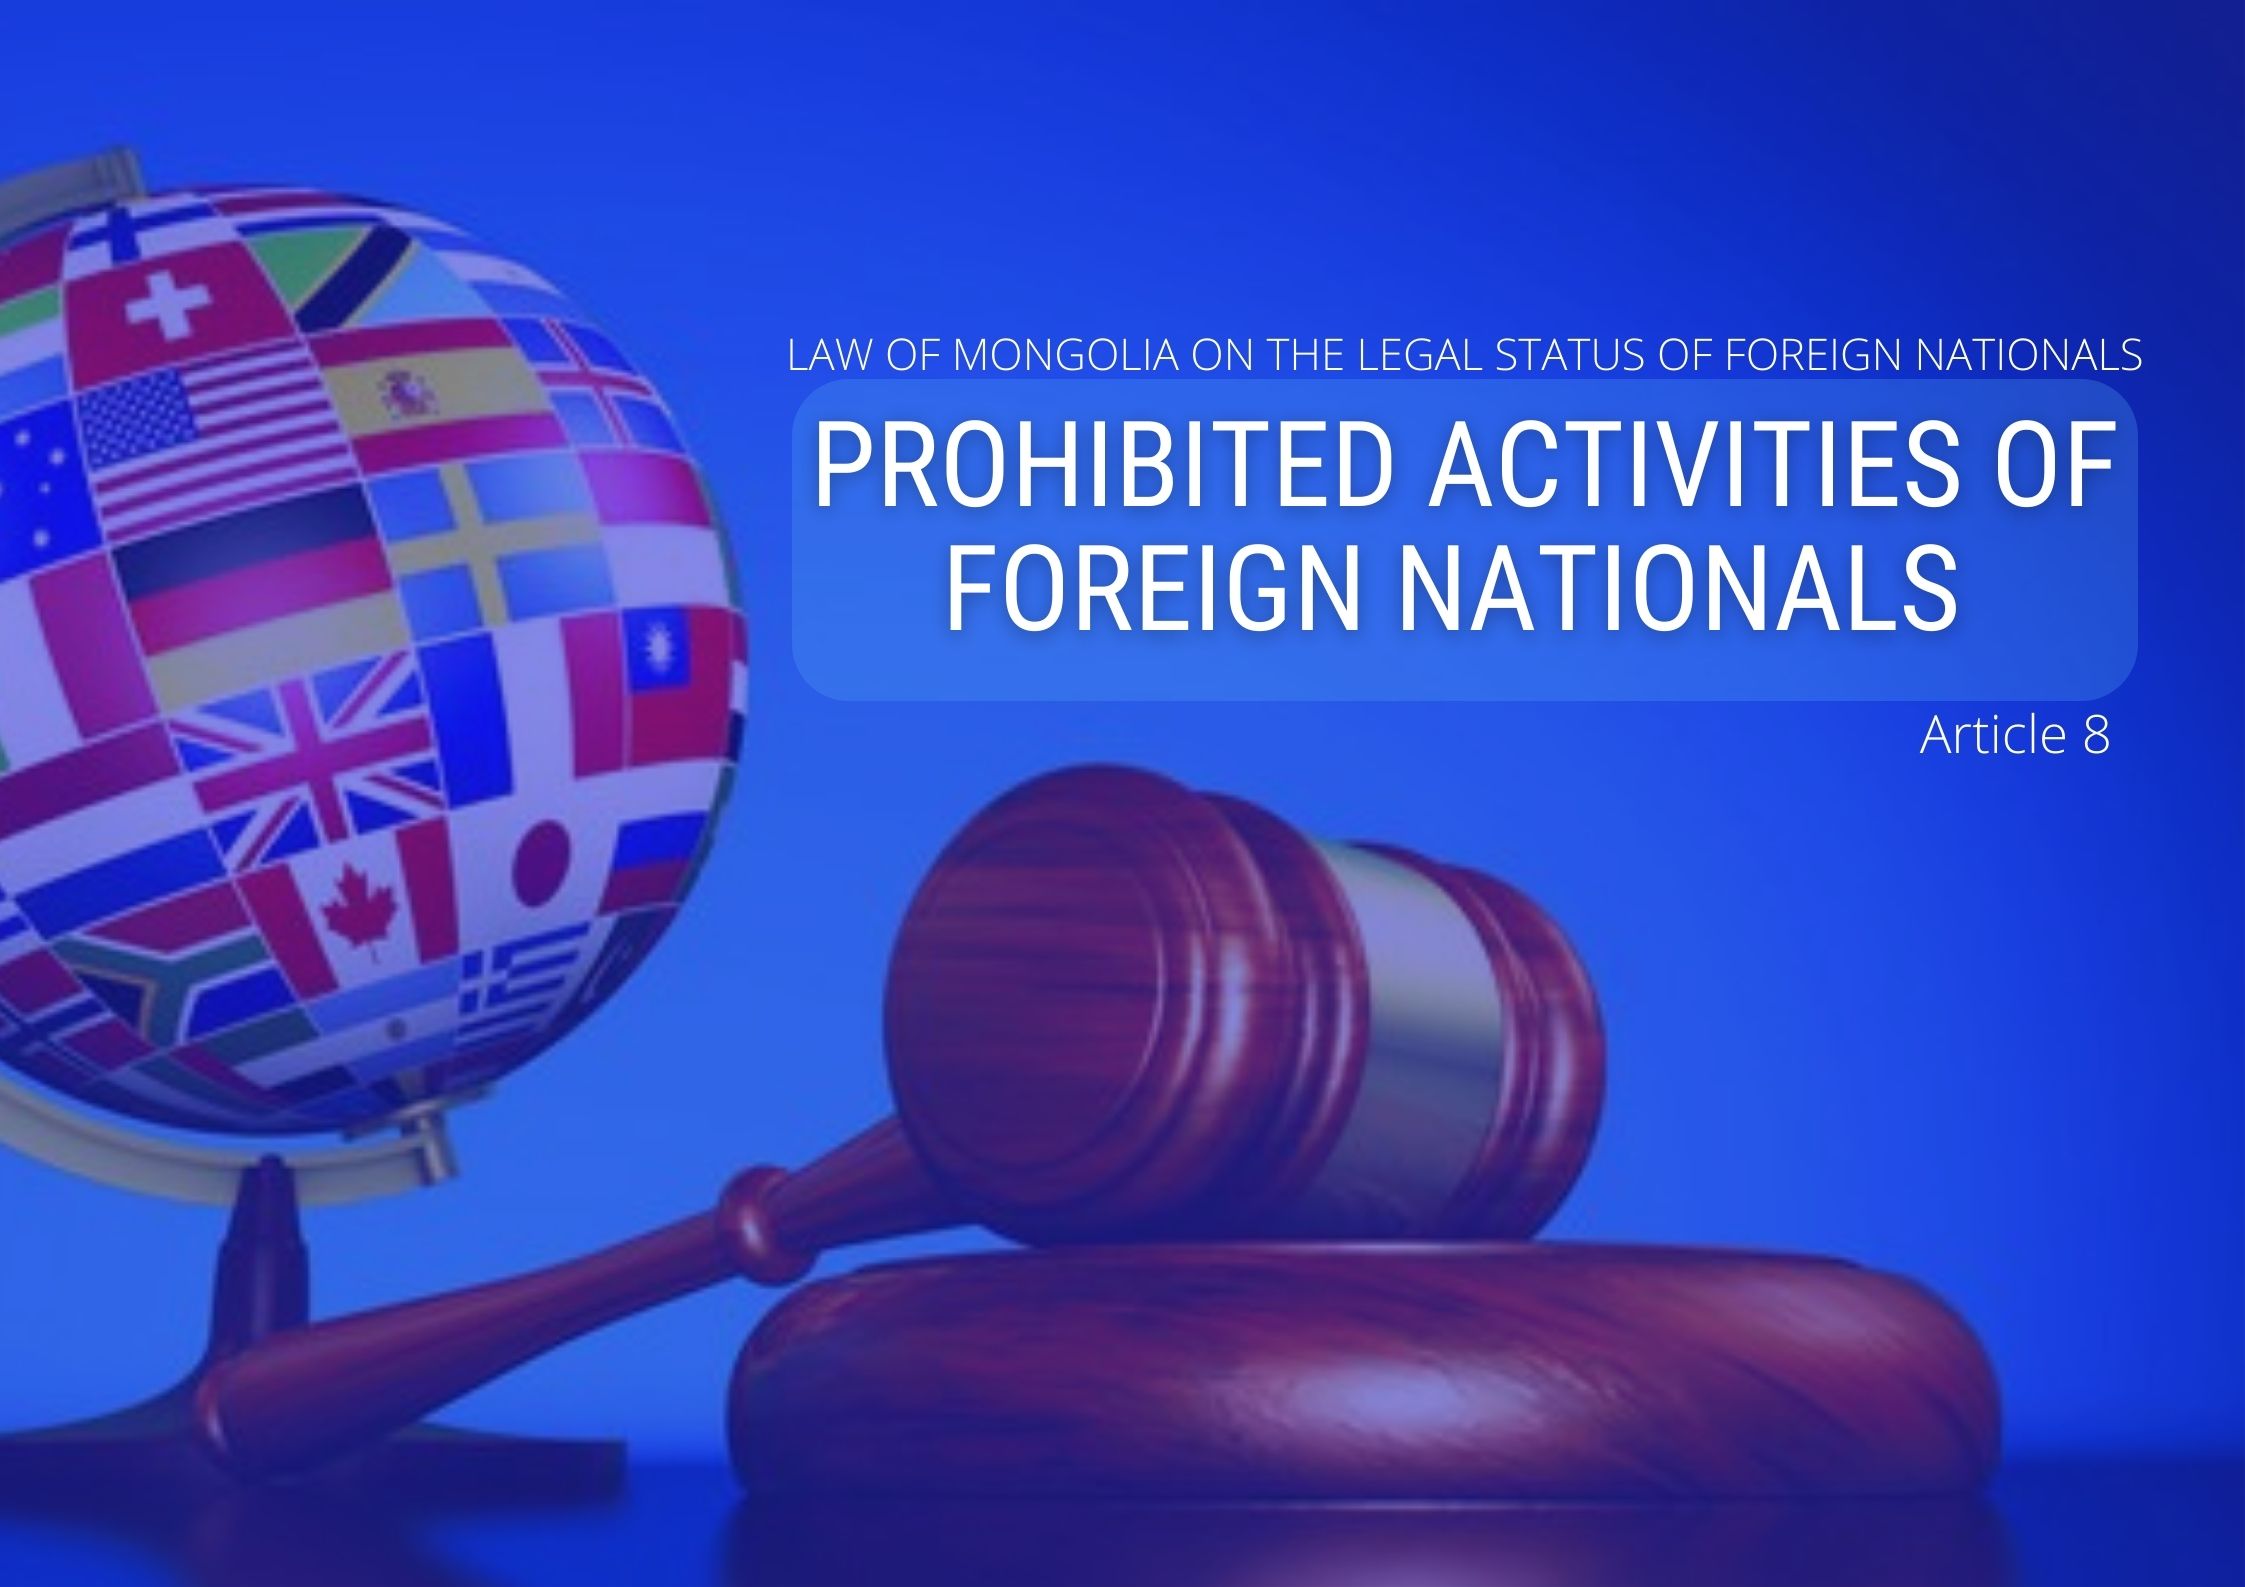 Prohibited activities of foreign nationals